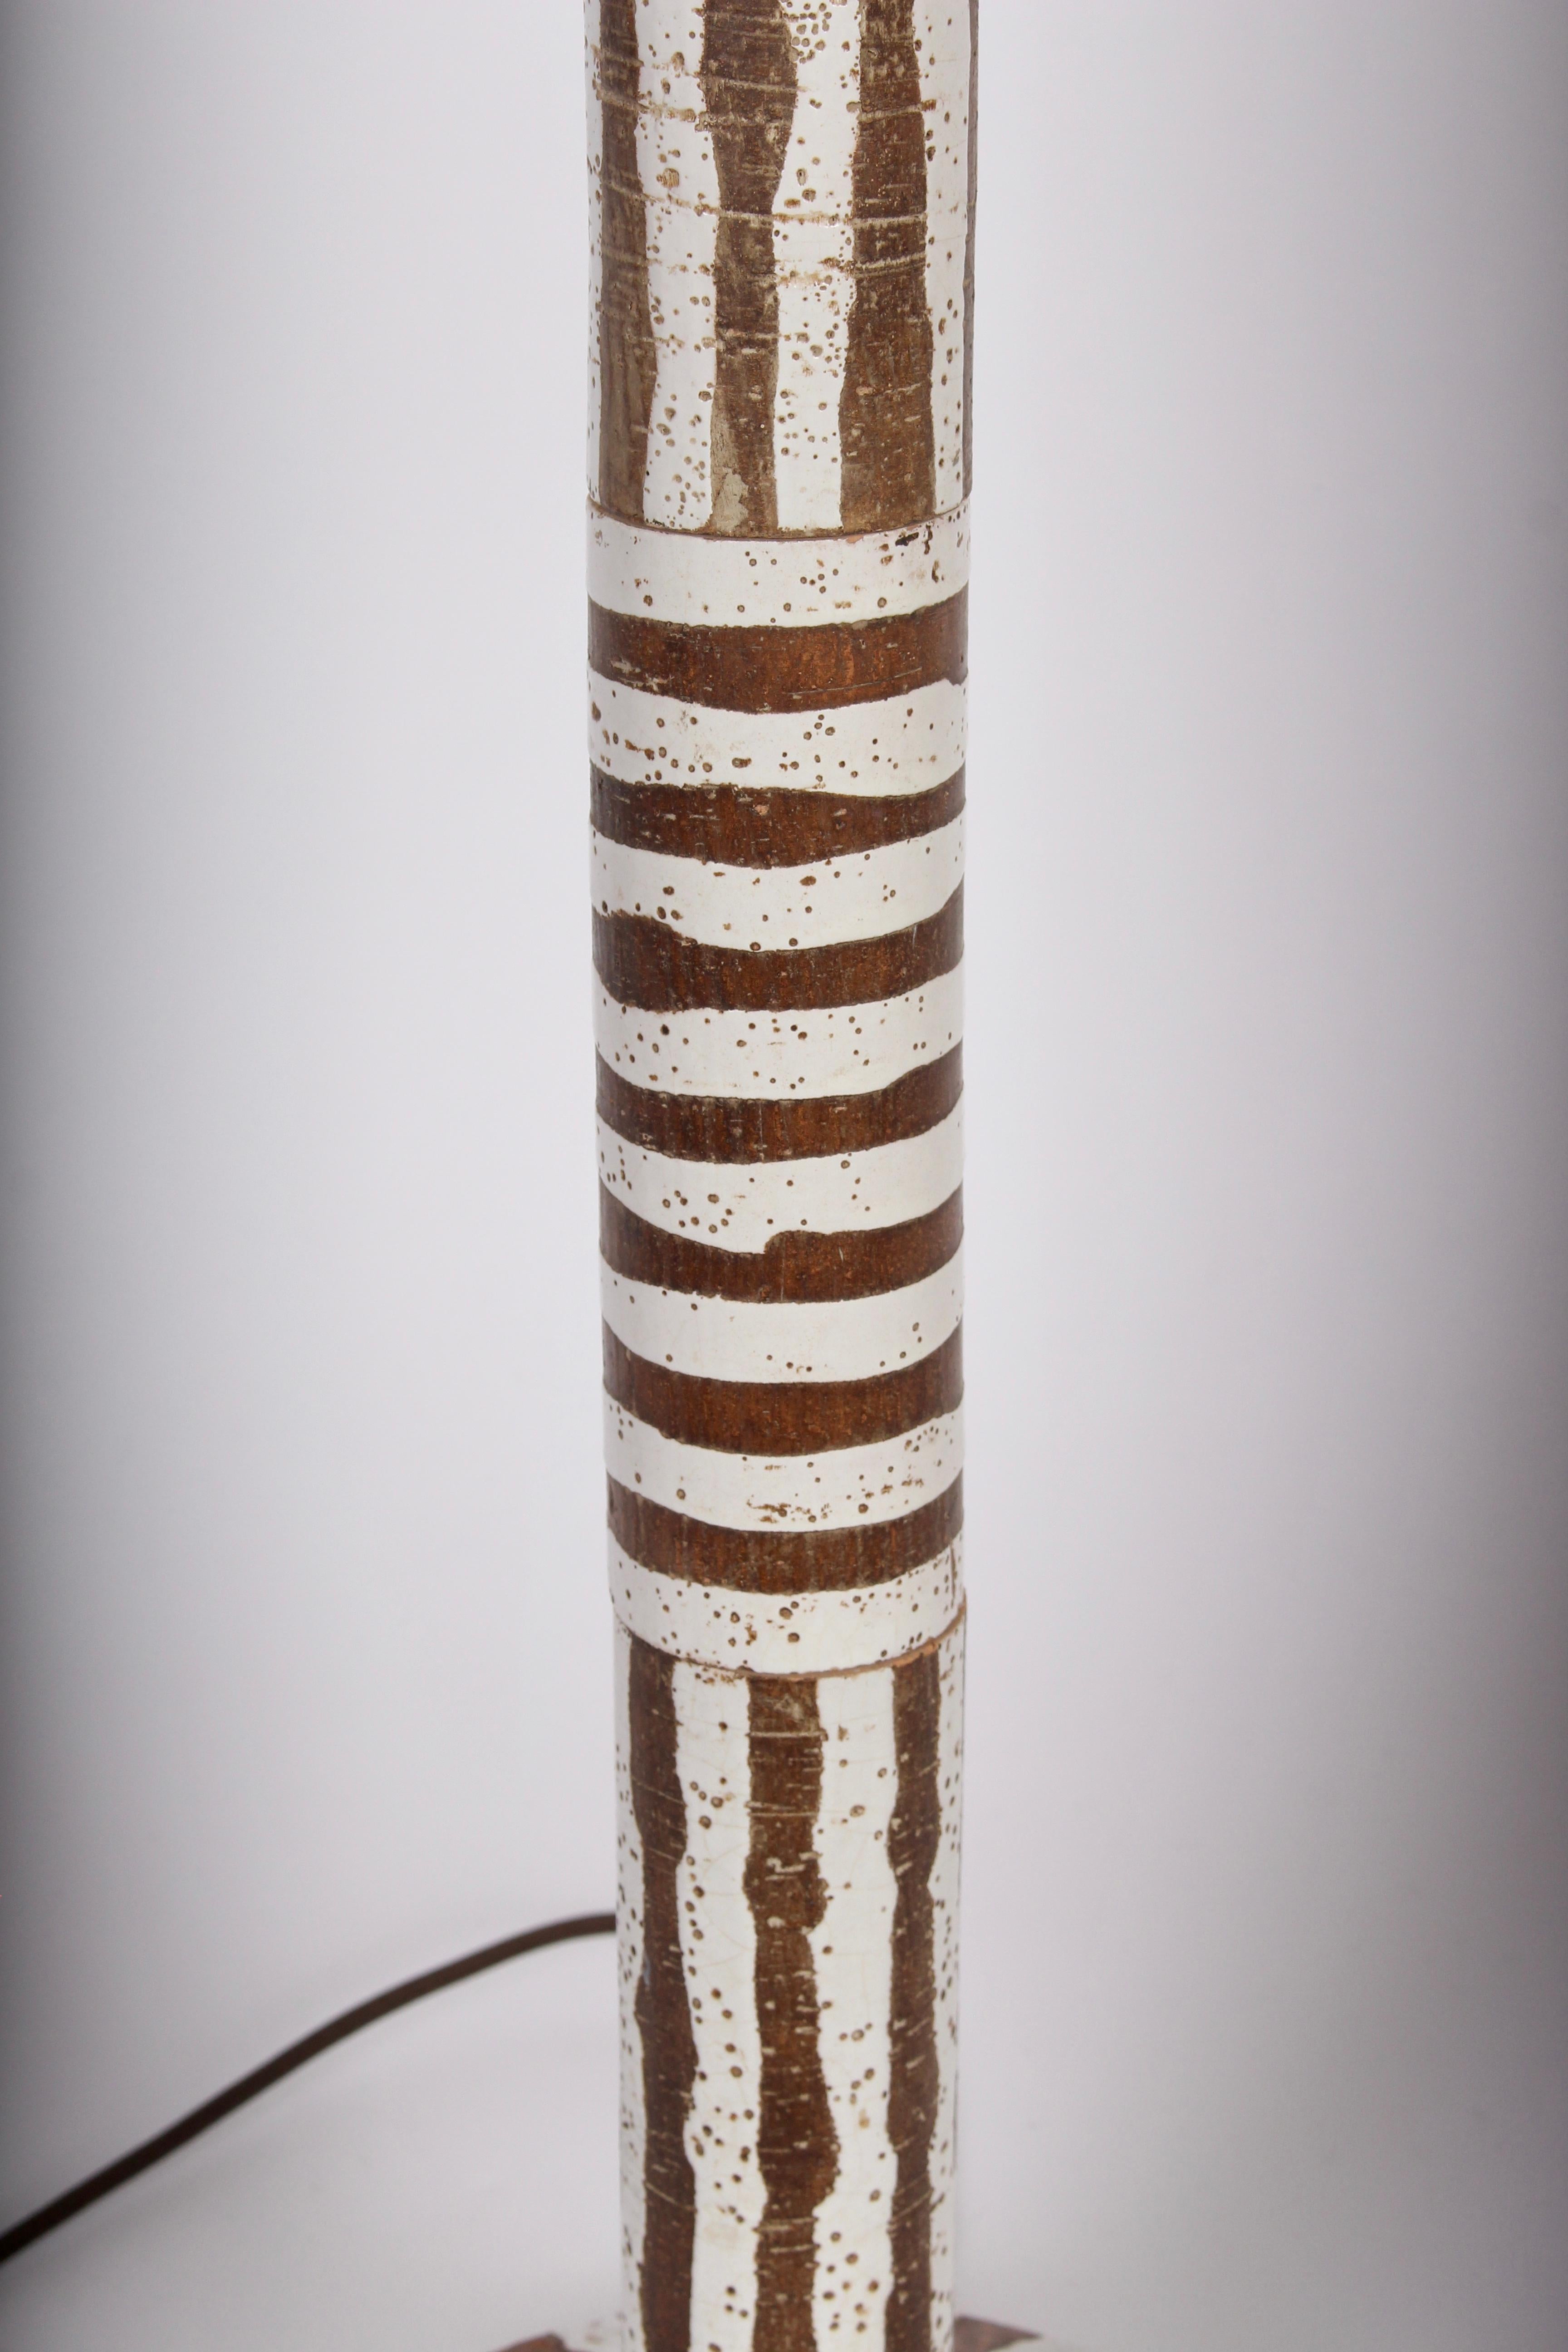 Glazed Tall Ugo Zaccagnini Hand Painted Brown and White Stripe Table Lamp, circa 1960